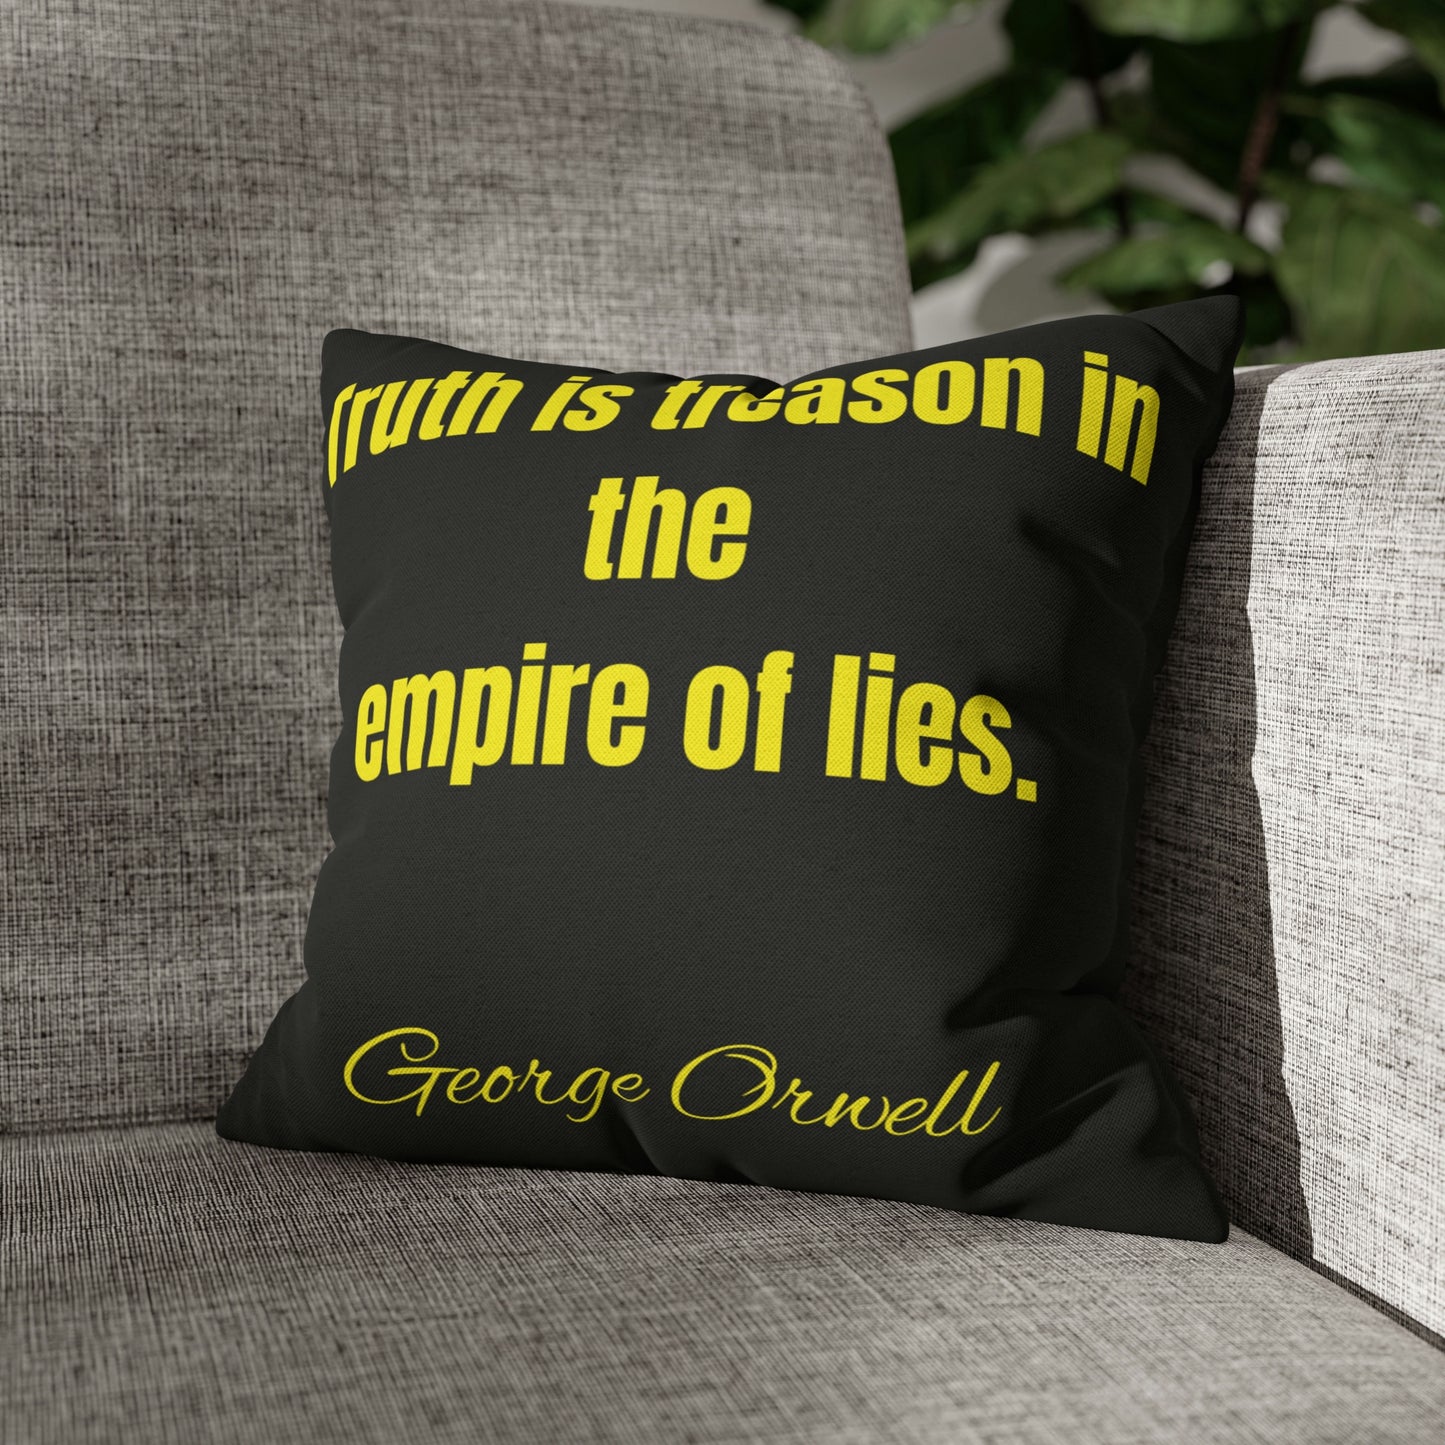 George Orwell "Truth Is Treason" Polyester Square Pillow Case